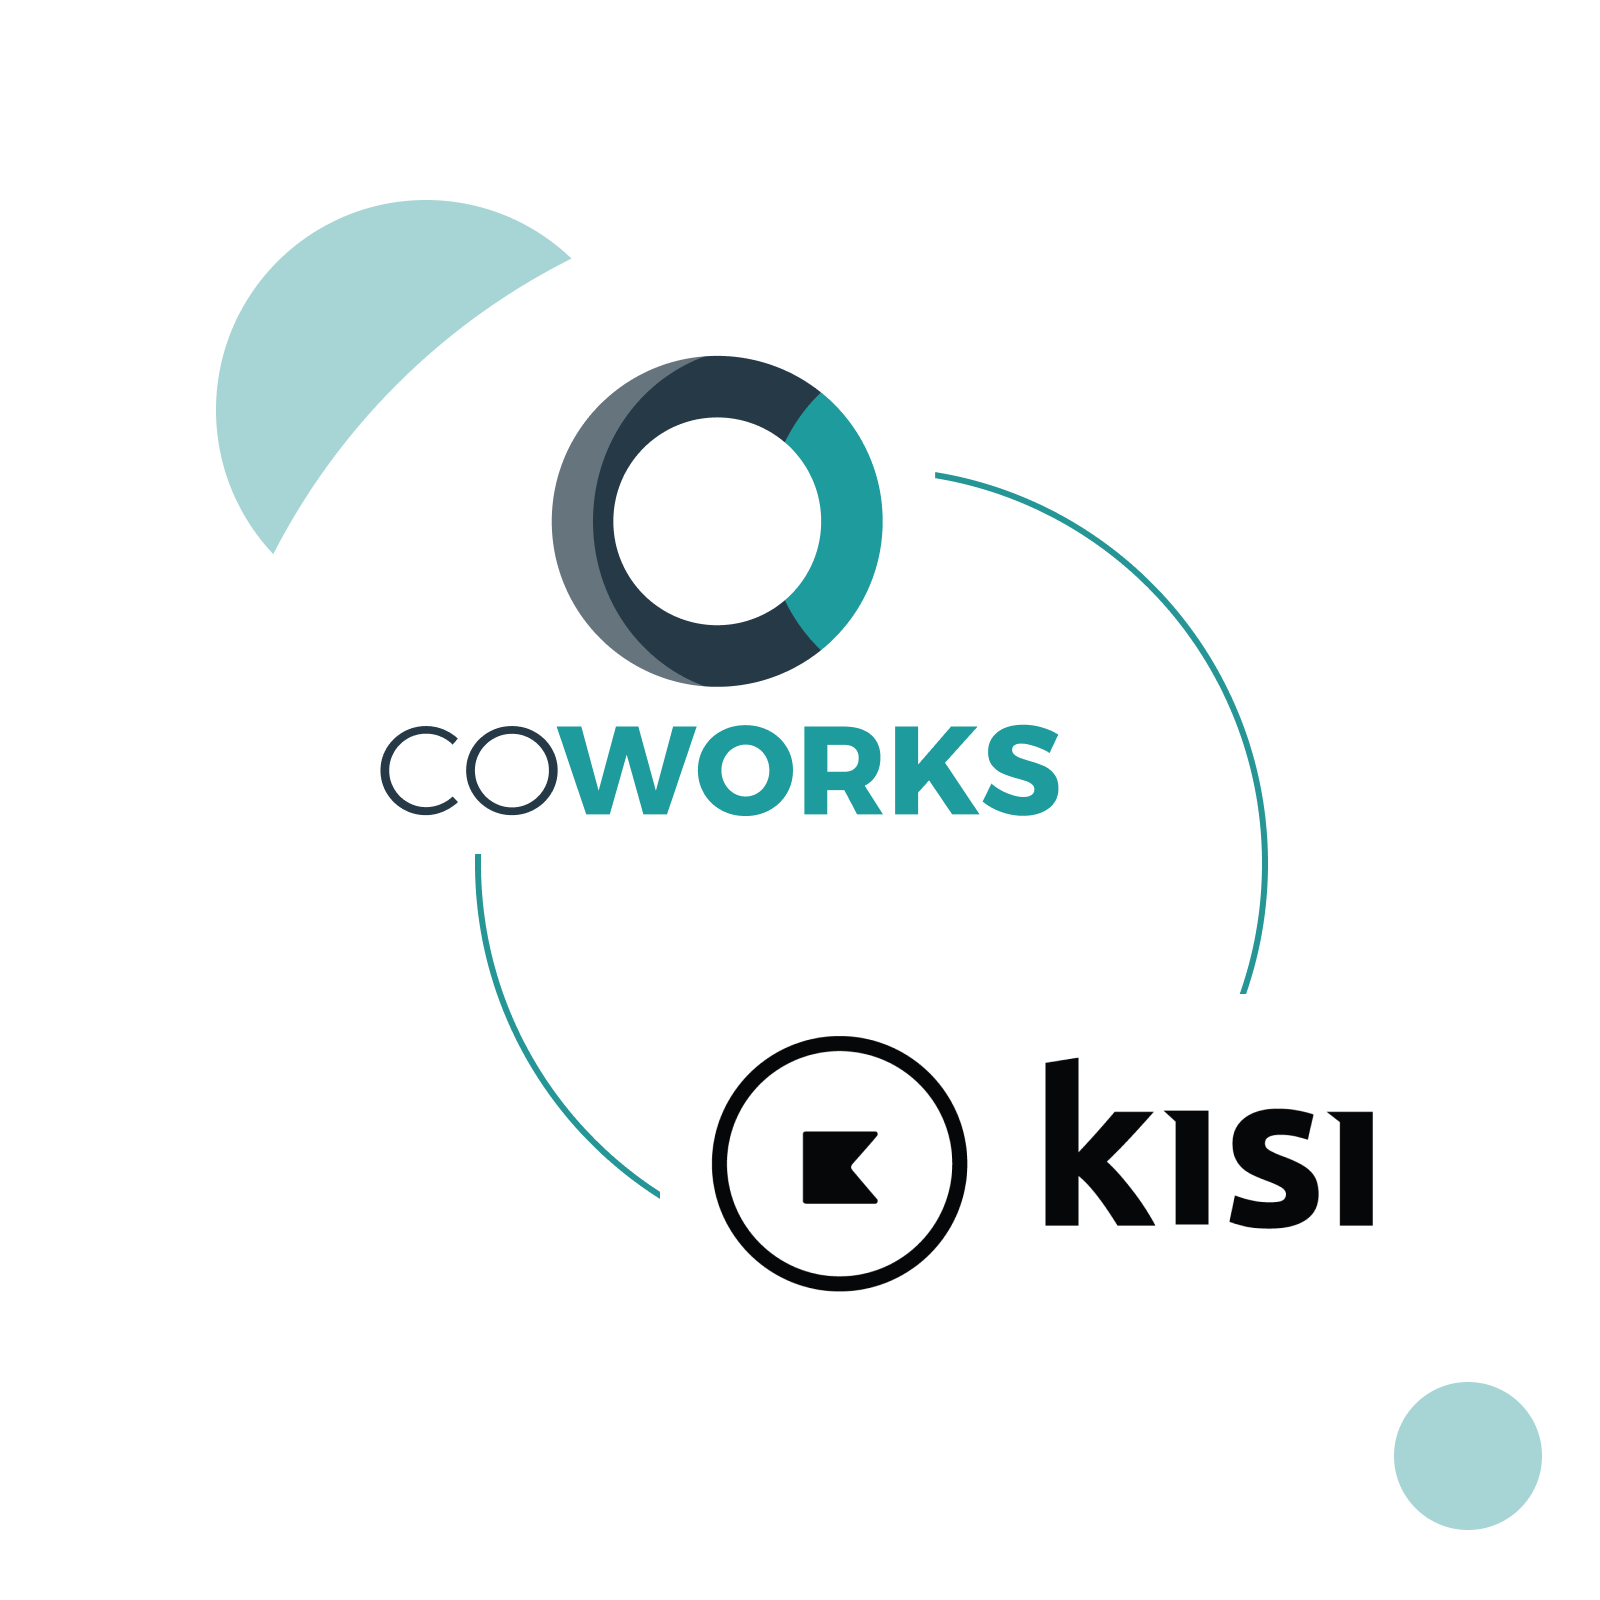 Interconnected logos of Coworks and Kisi to show integration